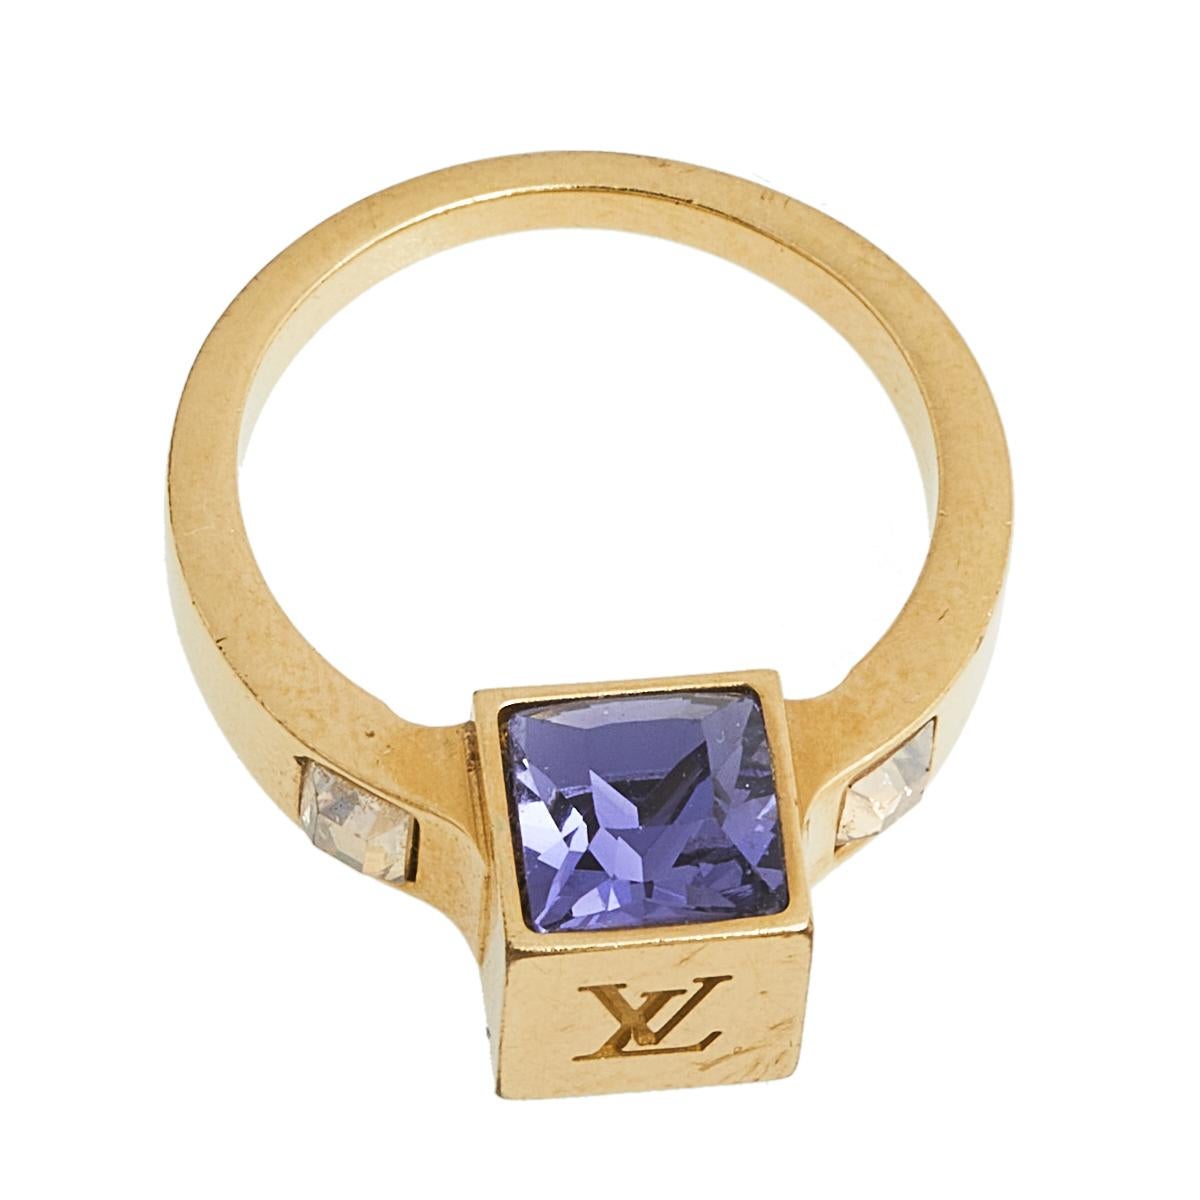 Artfully made from gold-tone metal, this flawless ring by Louis Vuitton can be your next prized possession. It features a gorgeous cube centerpiece with LV engraving and dazzling crystal embellishments. You're surely going to love this